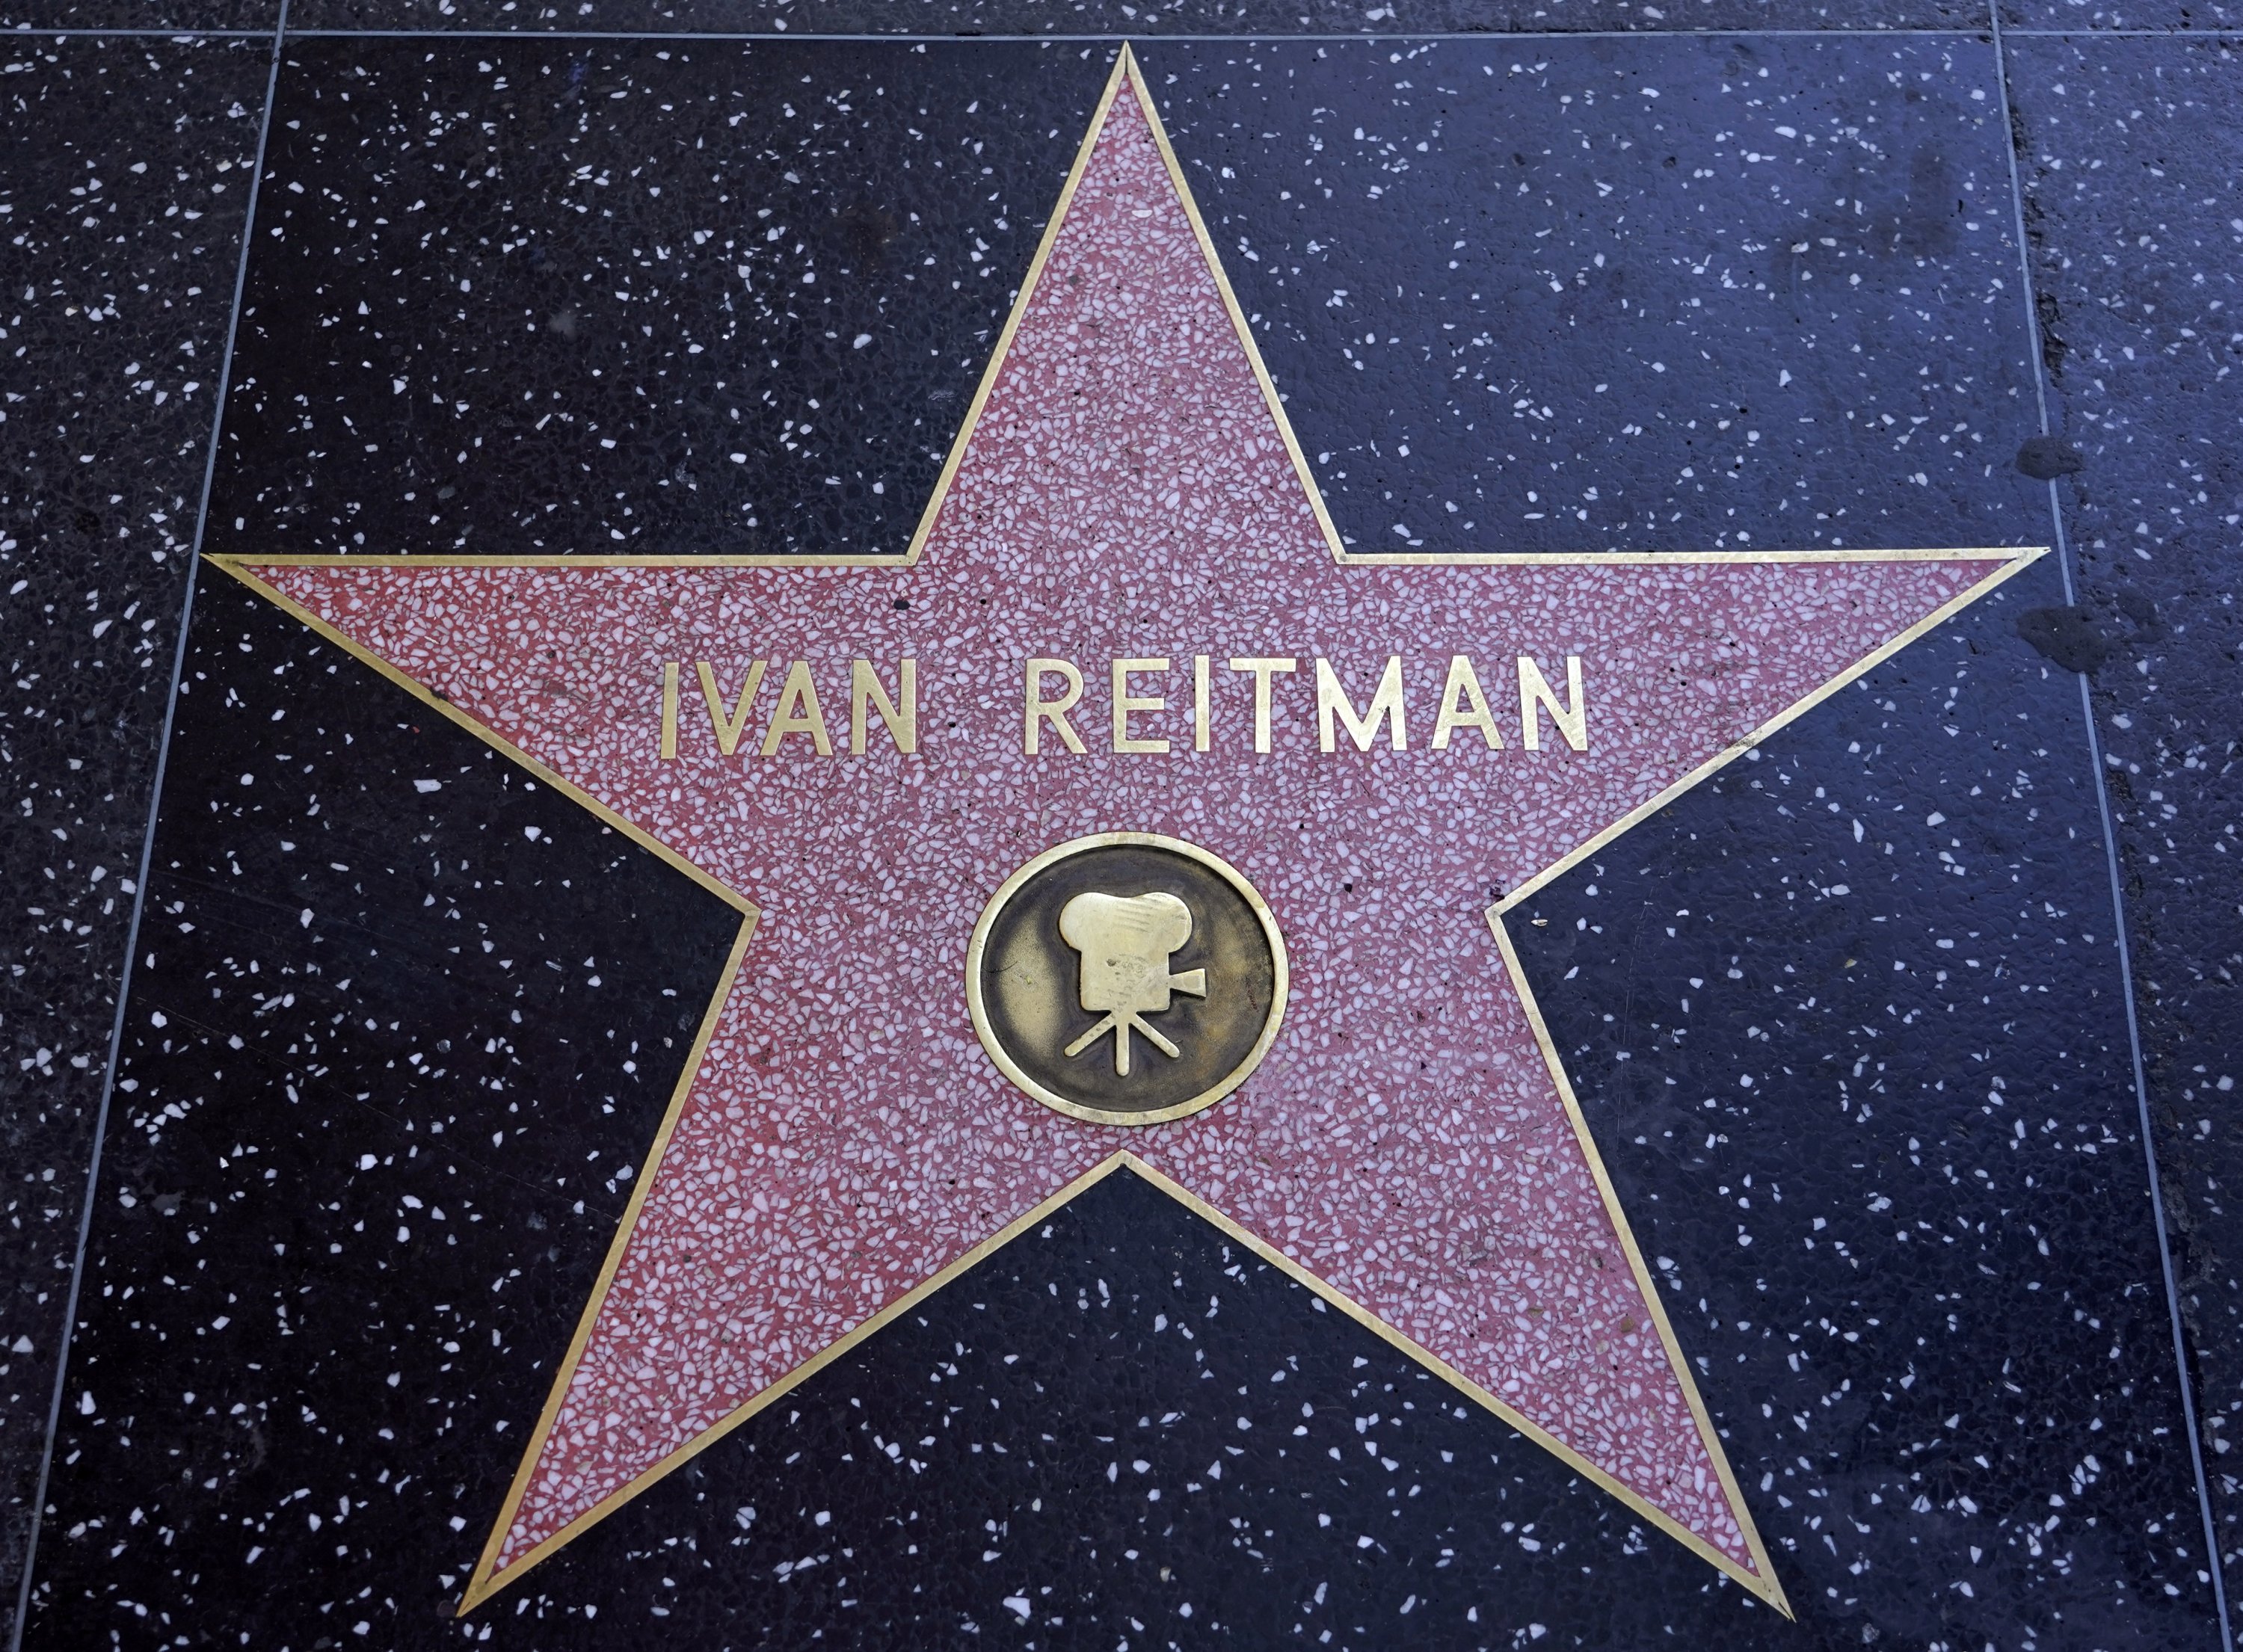 A star for film director Ivan Reitman is pictured on The Hollywood Walk of Fame in Los Angeles, U.S., Feb. 14, 2022. (AP Photo)